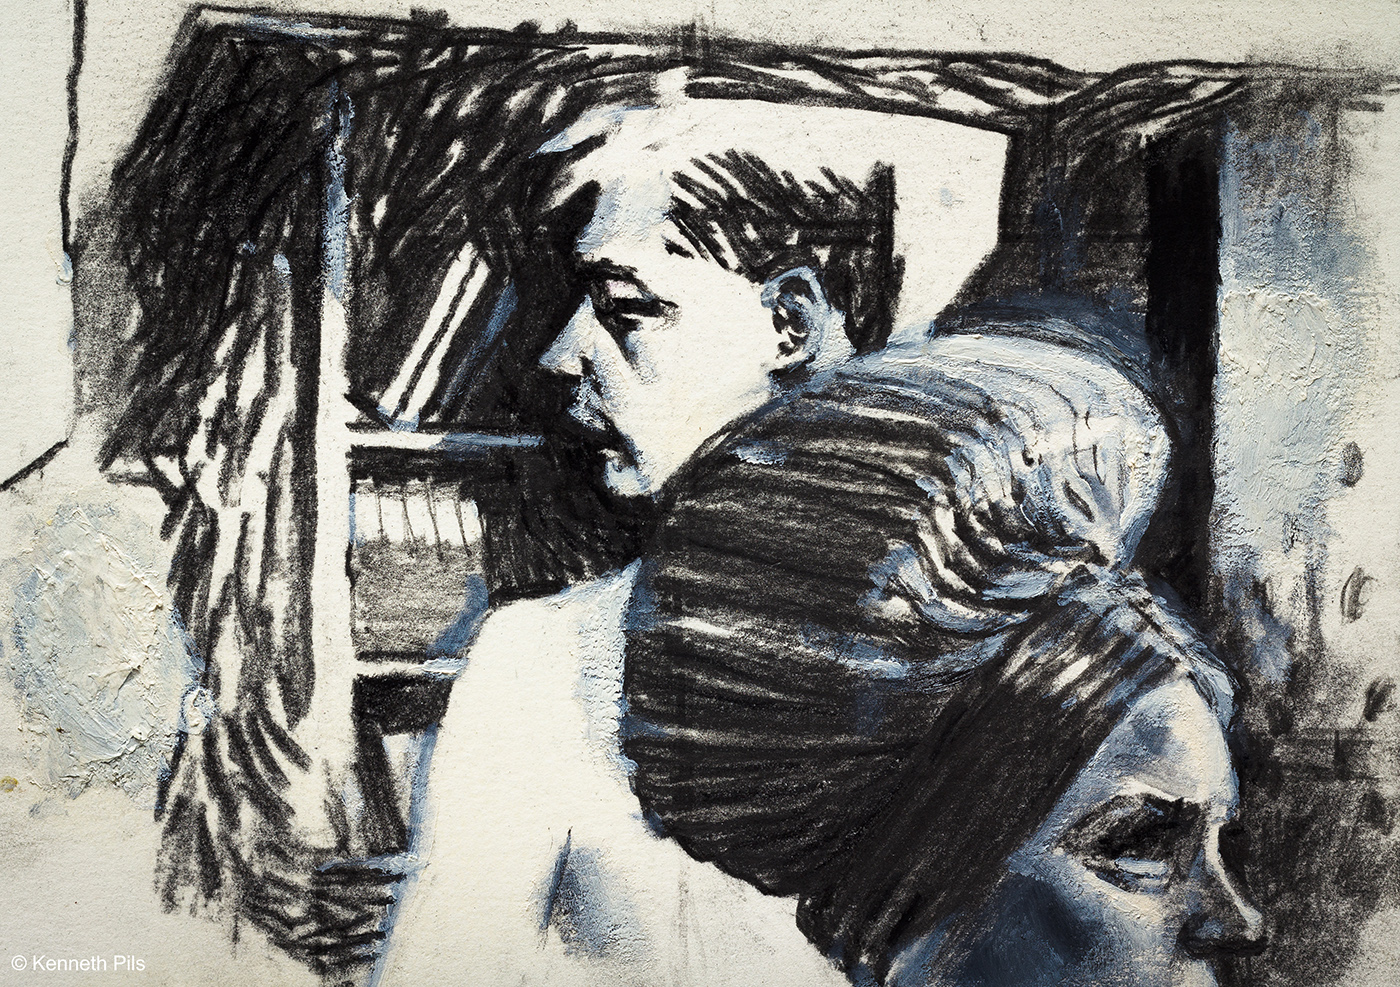 'The Flat Voice After', from the series 'Diaries', charcoal on paper, 21x15cm.